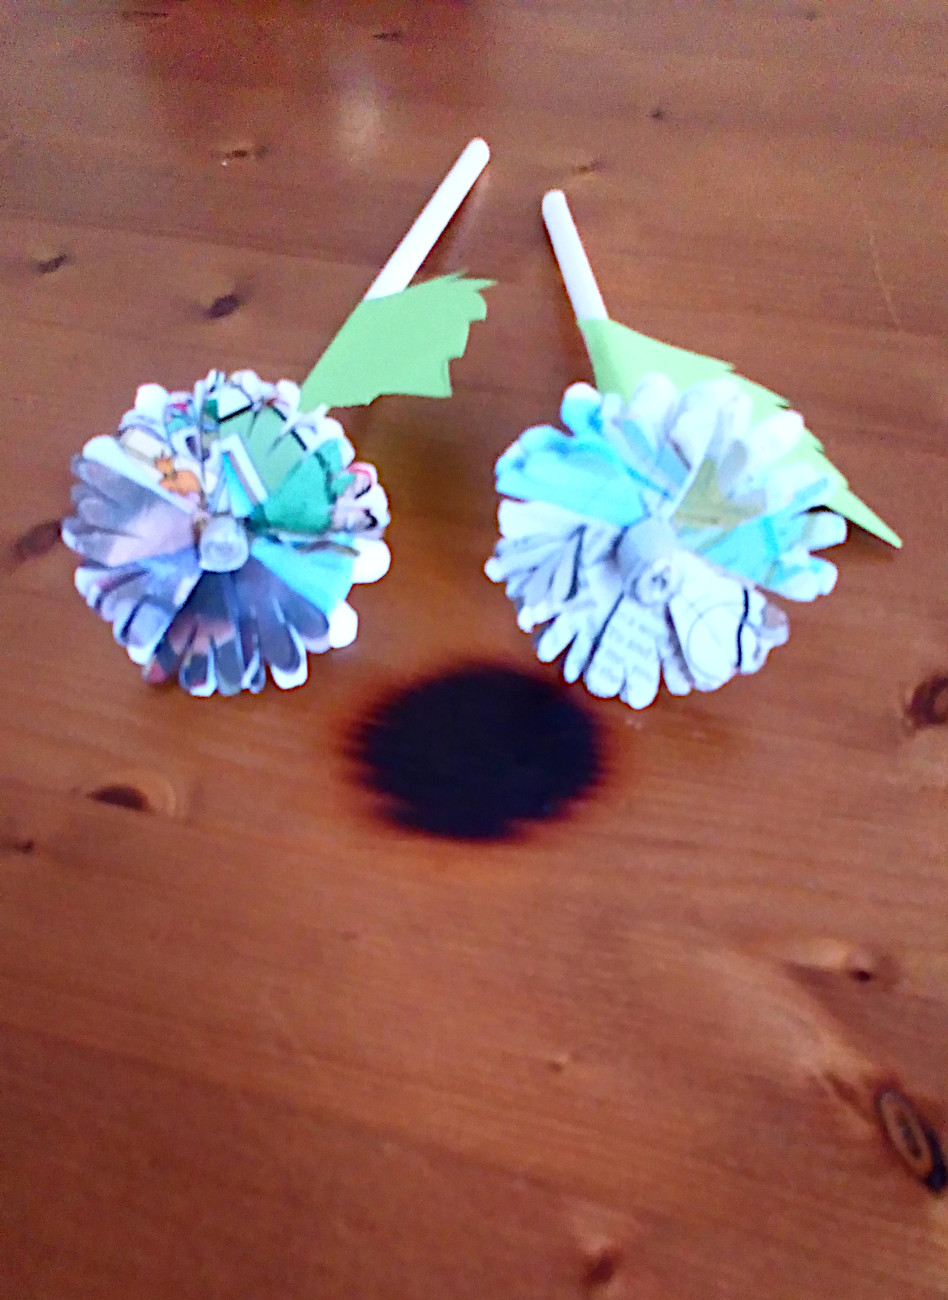 We helped people living with dementia and their families to make some beautiful paper flowers. Bring Joy Foundation fund made it possible to buy and post the materials to the group.